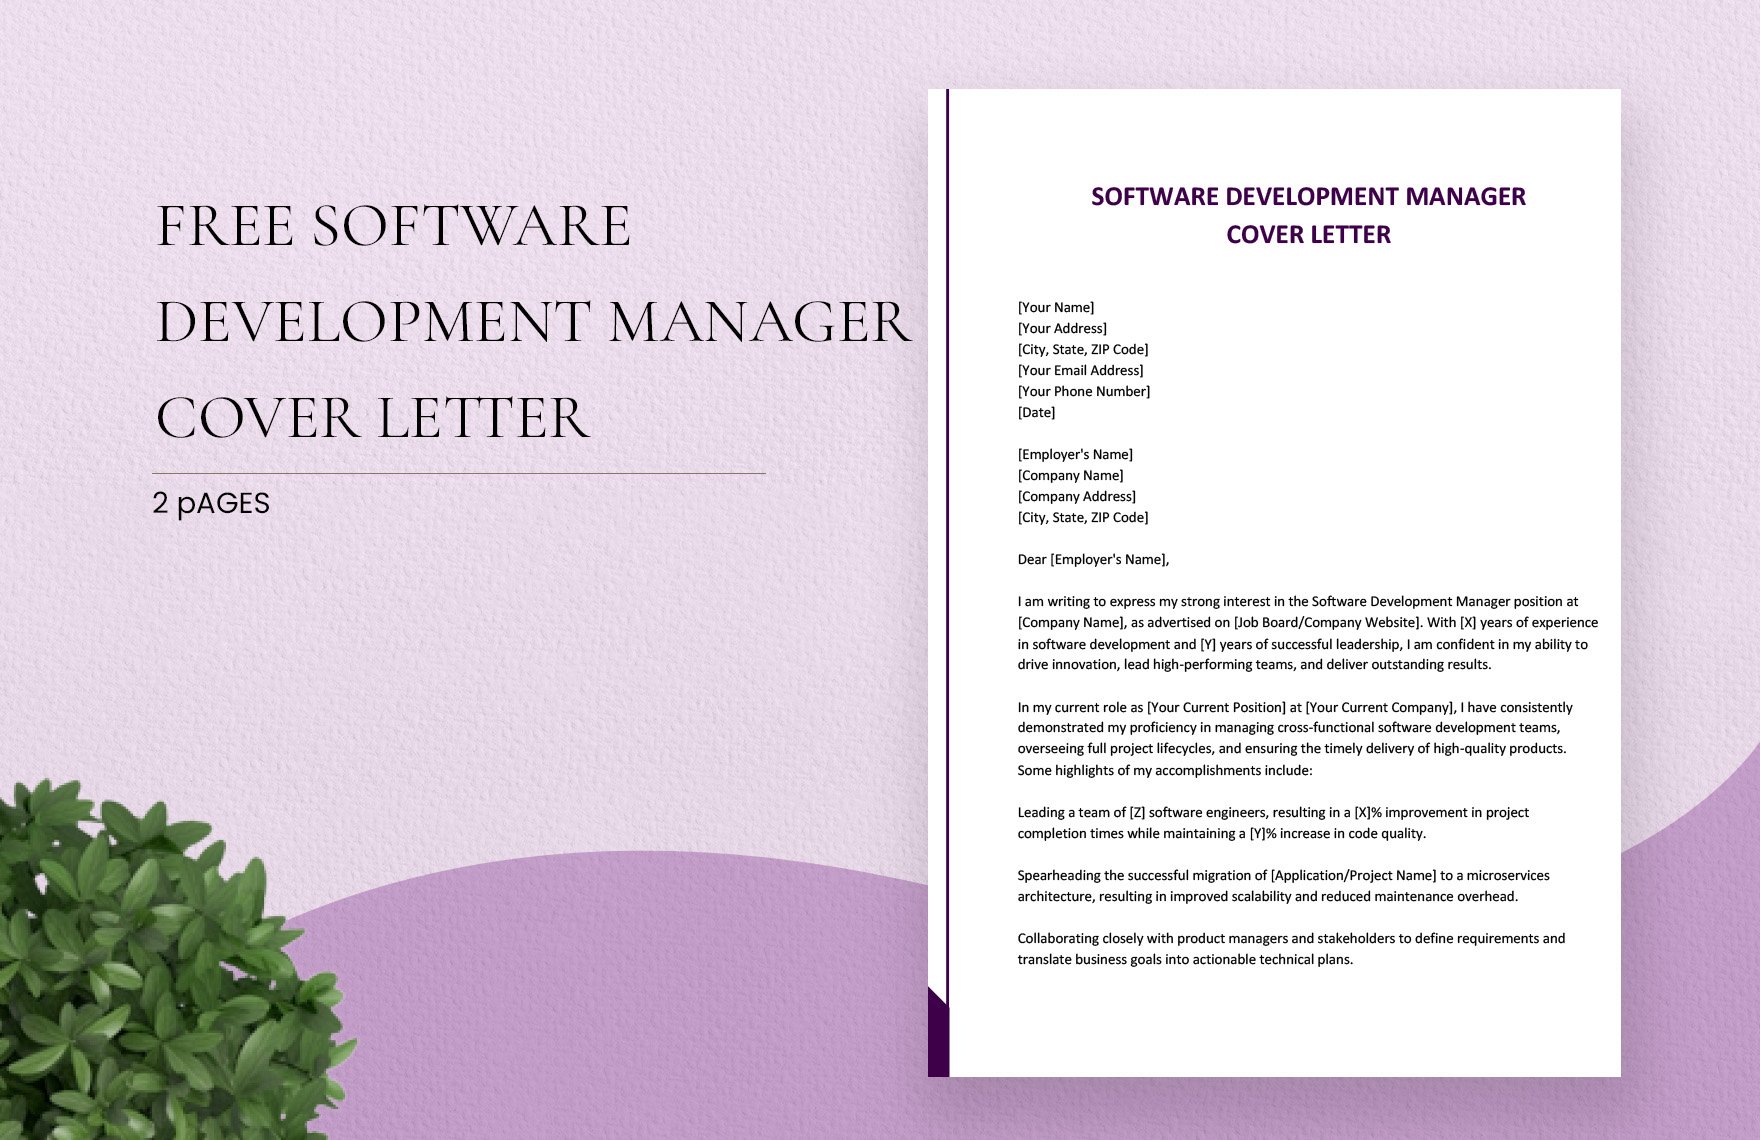 Software Development Manager Cover Letter